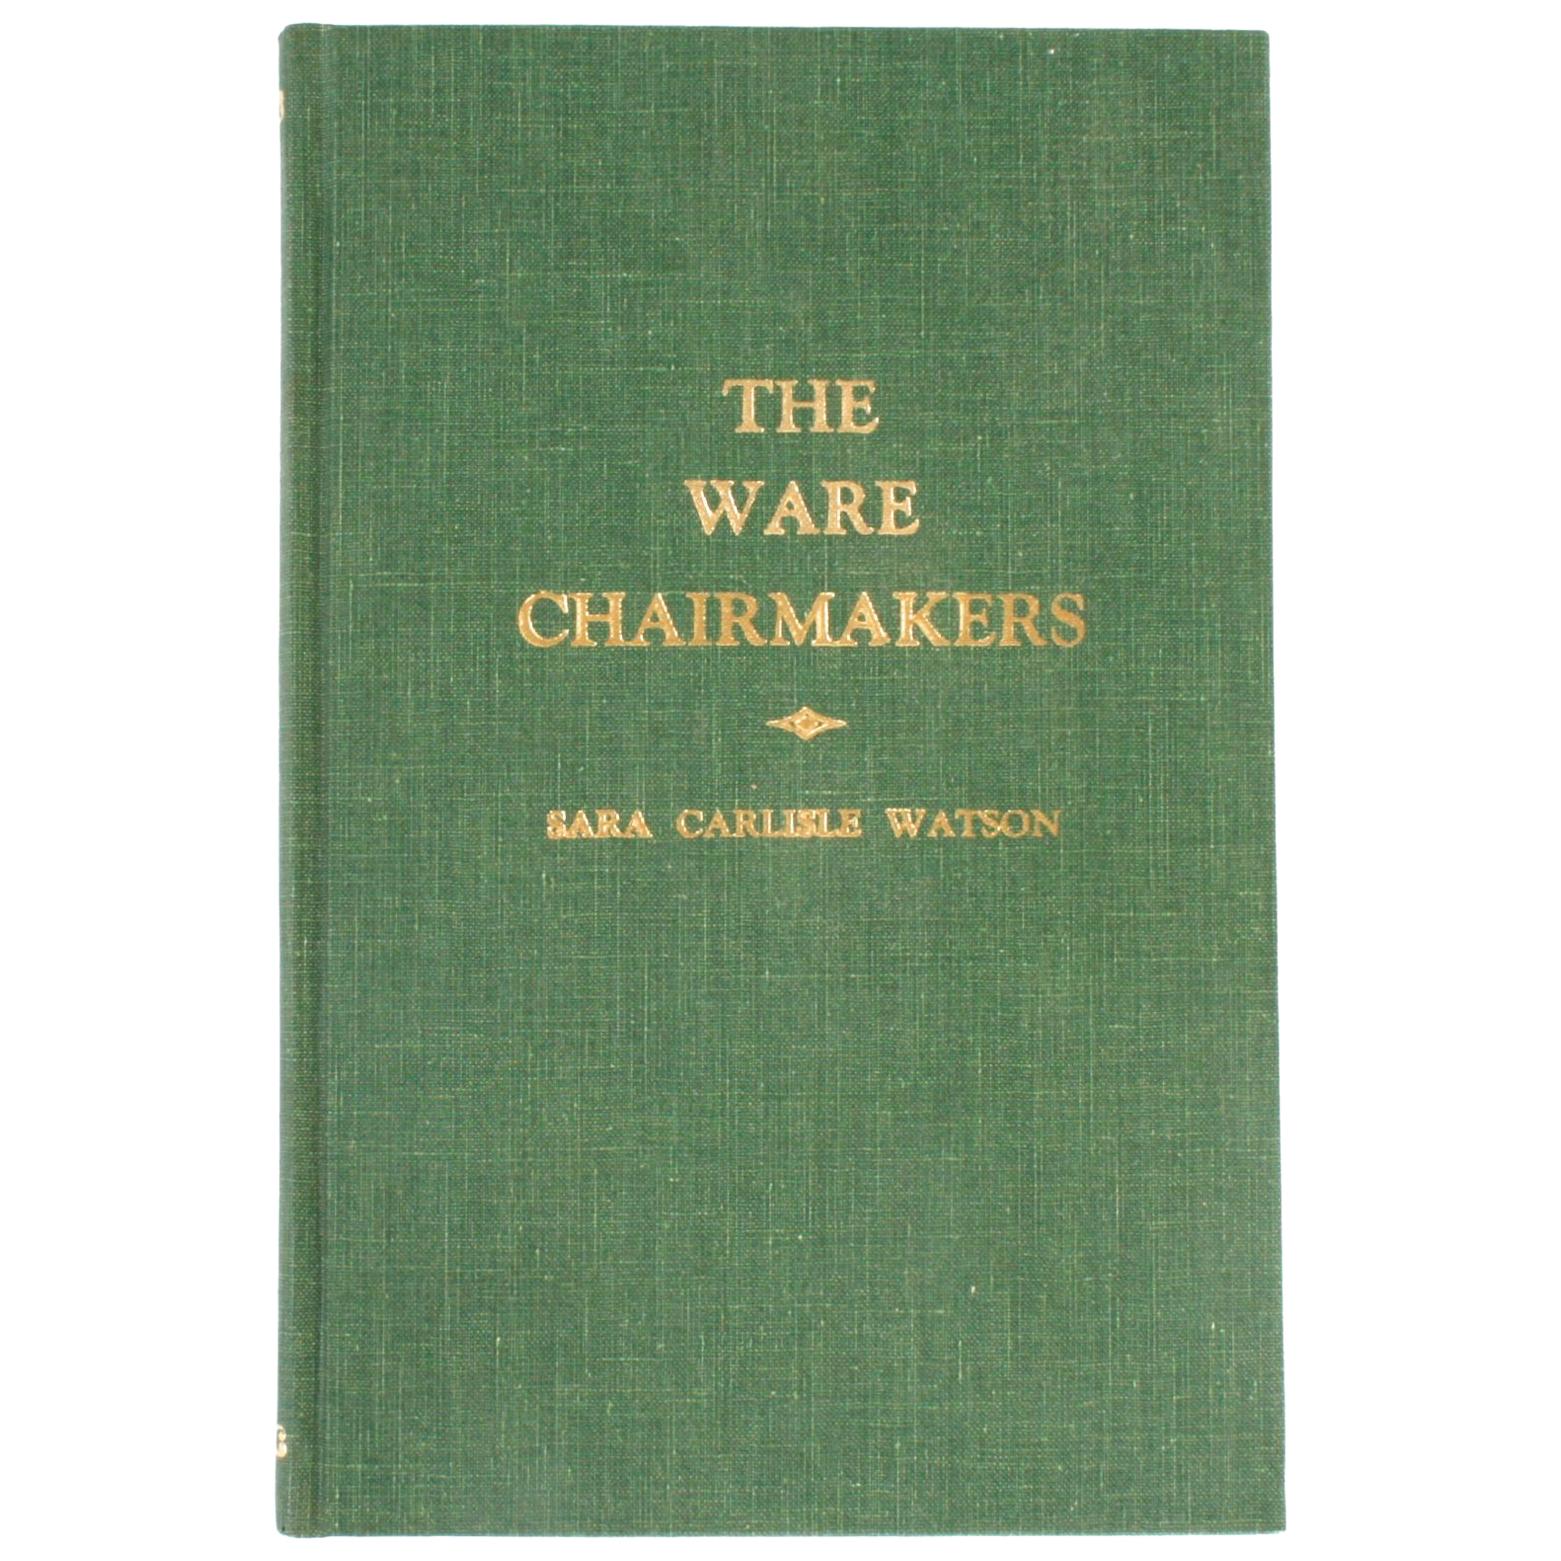 The Ware Chair Makers, by Sara Carlisle Watson, Signed Copy